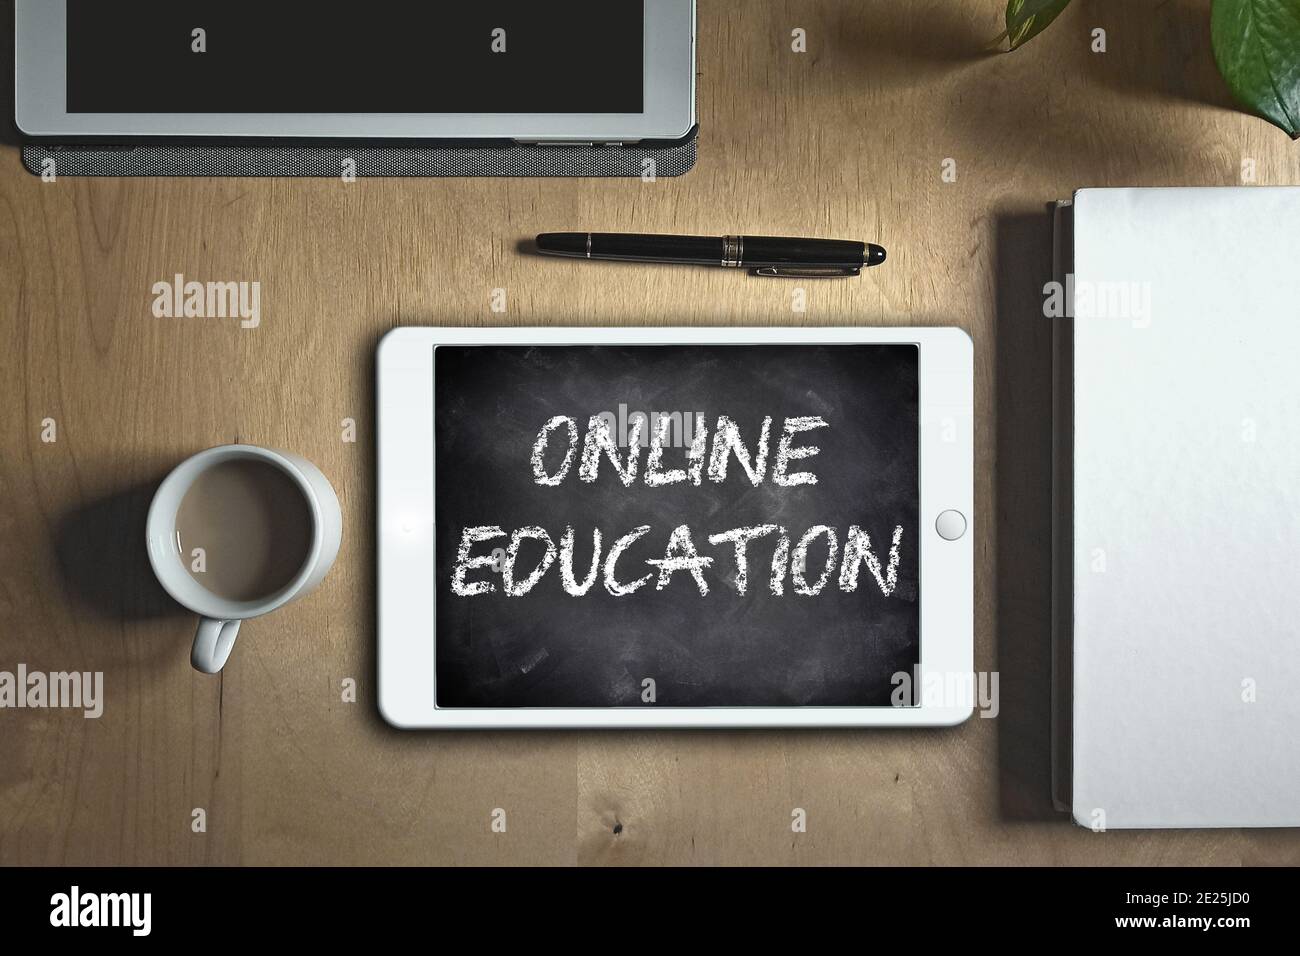 Student's desk at home assisting to an online class using a tablet. Online education concept. Stock Photo